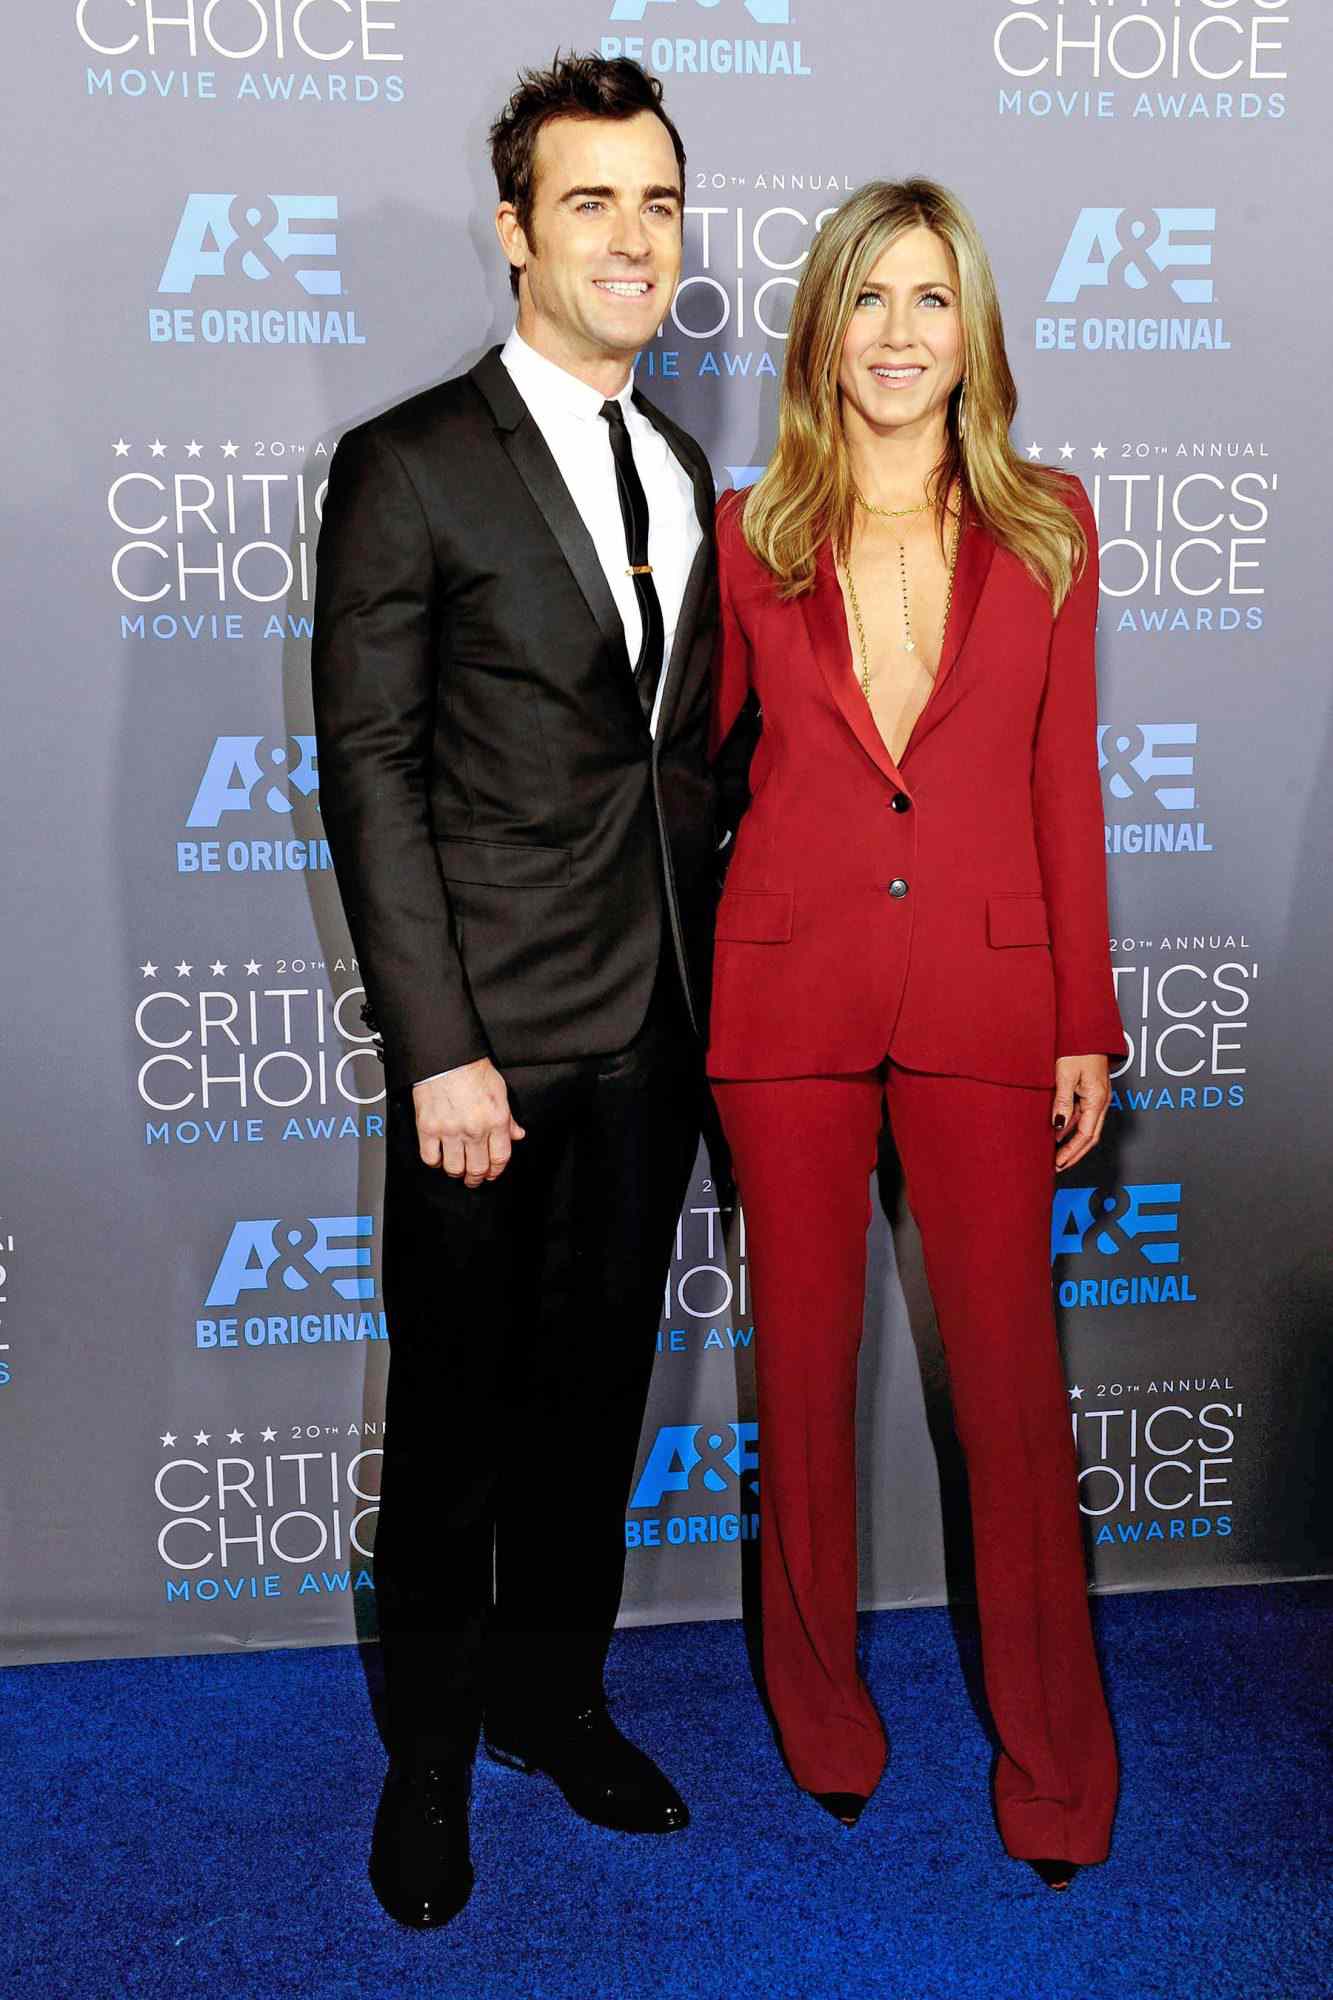 Justin Theroux and Jennifer Aniston at the 20th Annual Critics' Choice Movie Awards in Los Angeles on Jan. 15, 2015